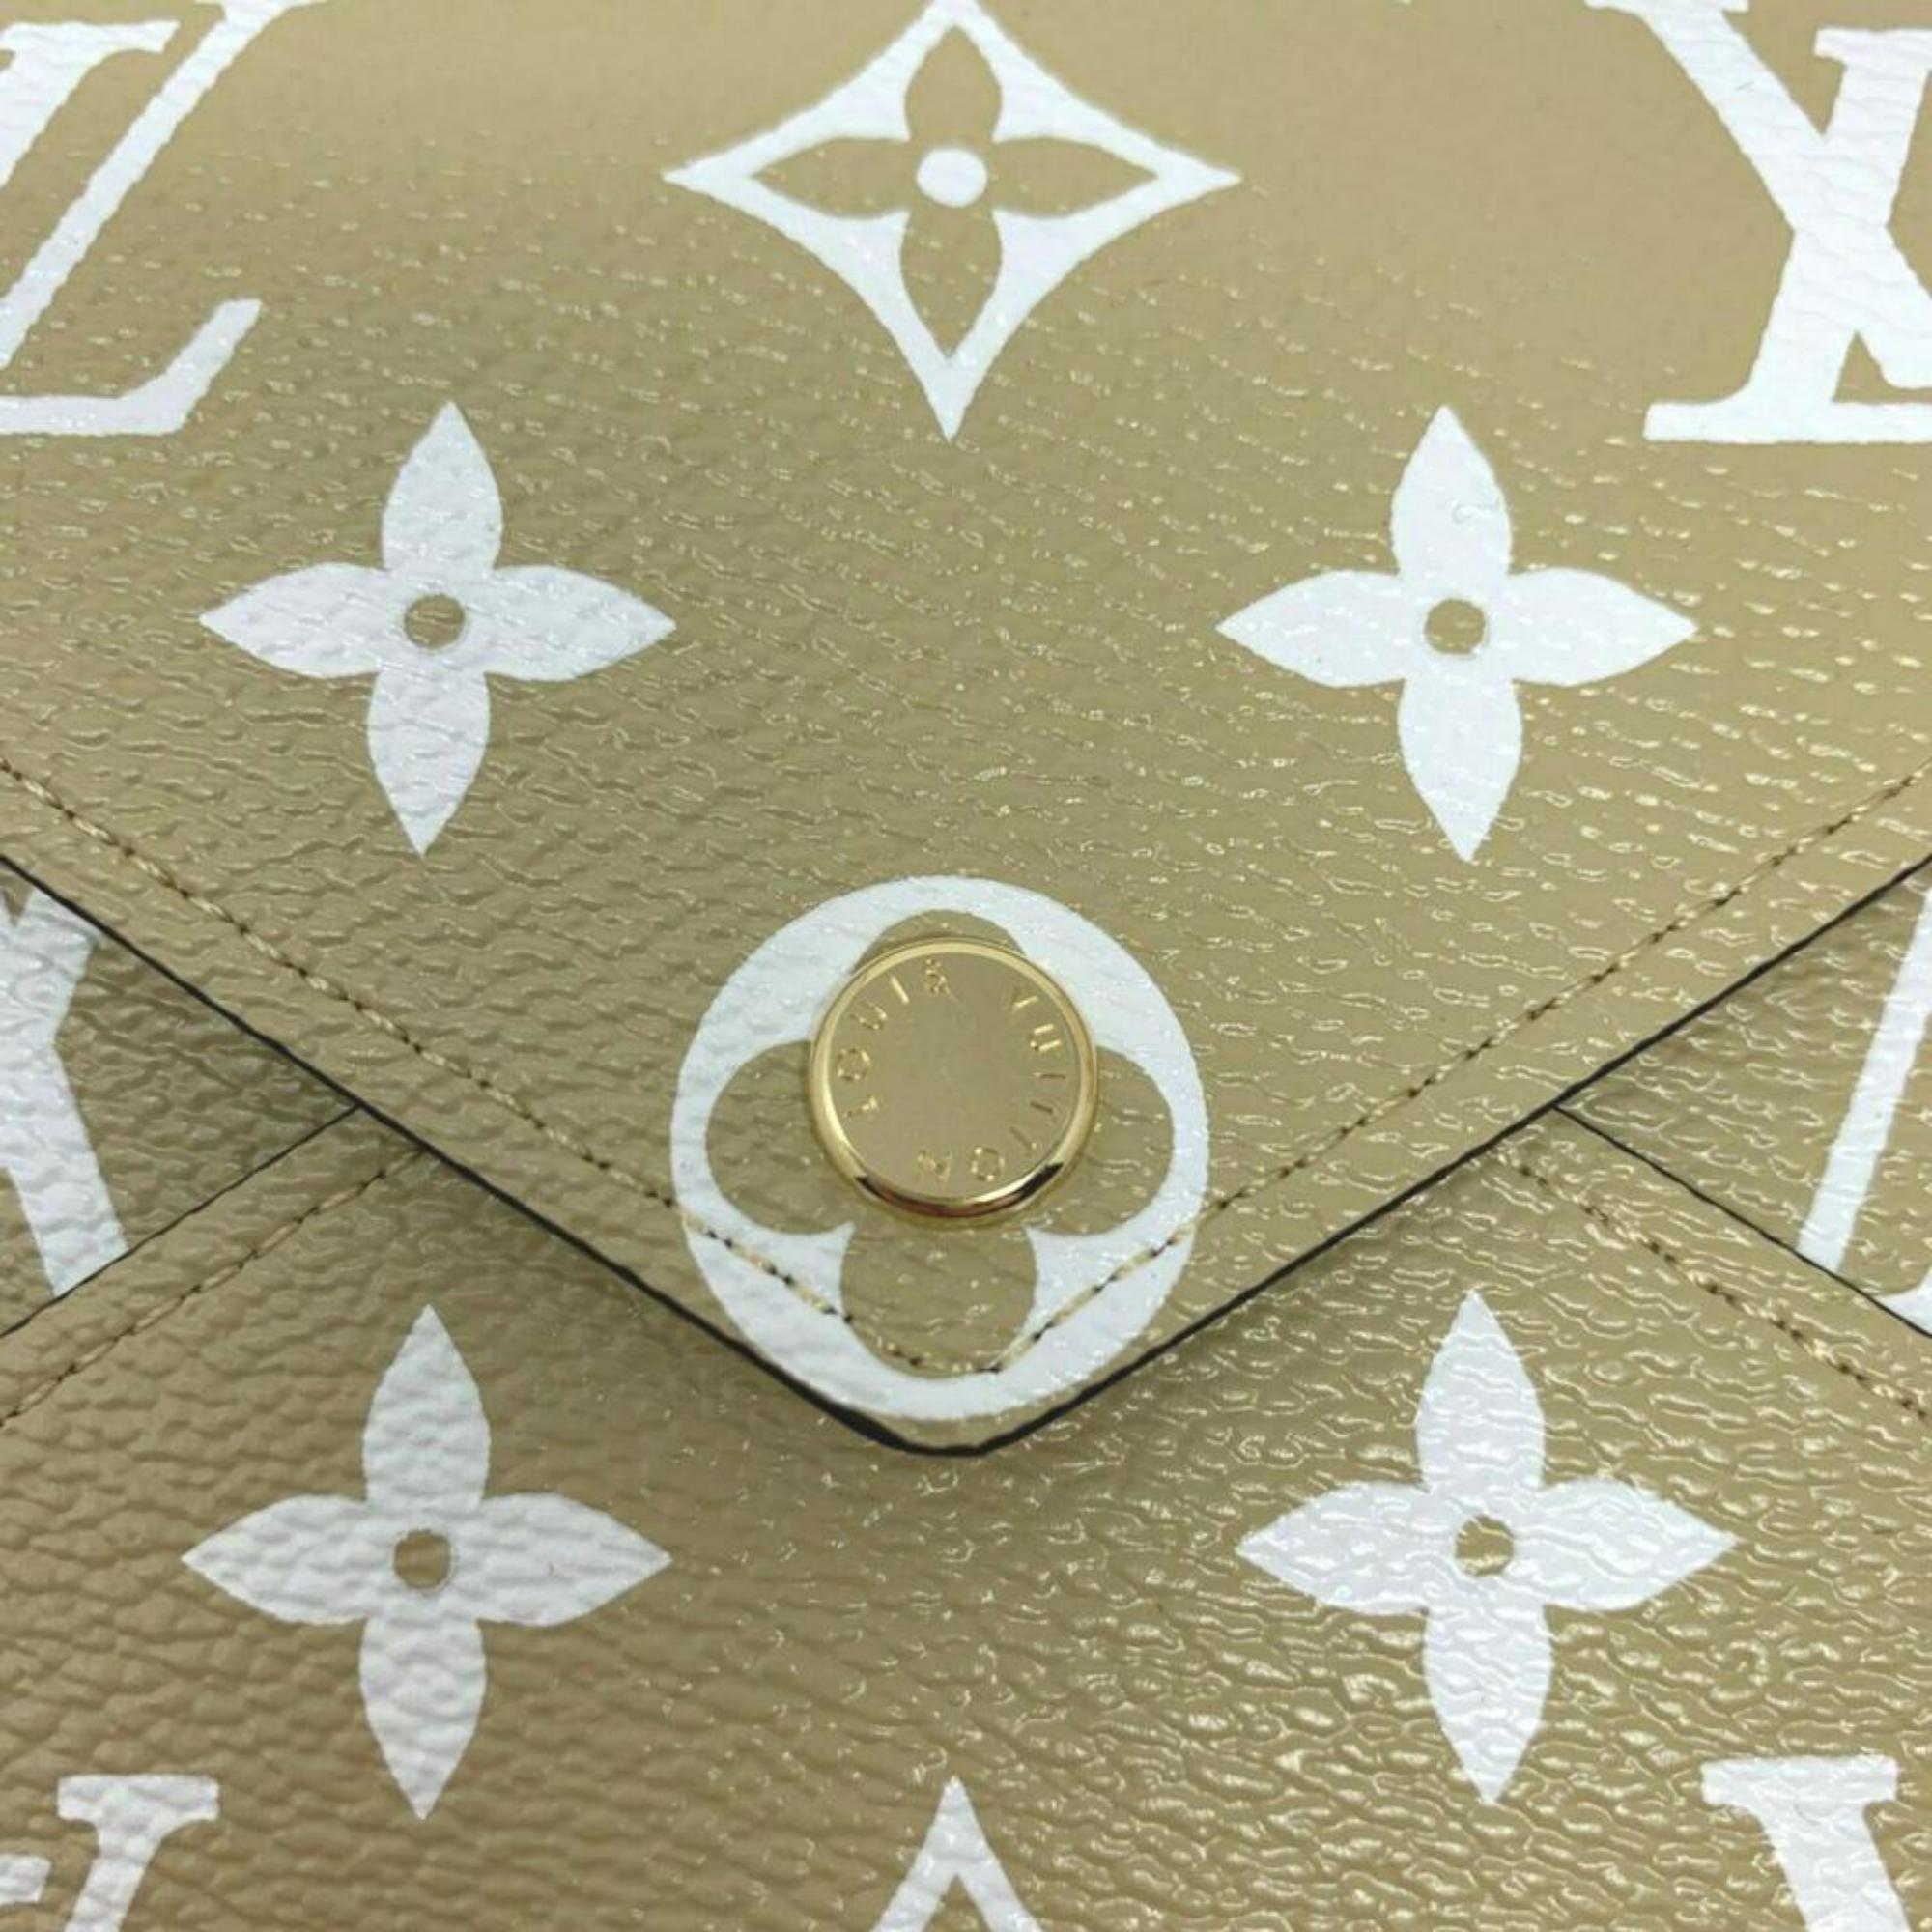 Louis Vuitton Beige Medium Ss19 Limited Edition Giant Kirigami Pouch 870619  In New Condition For Sale In Forest Hills, NY